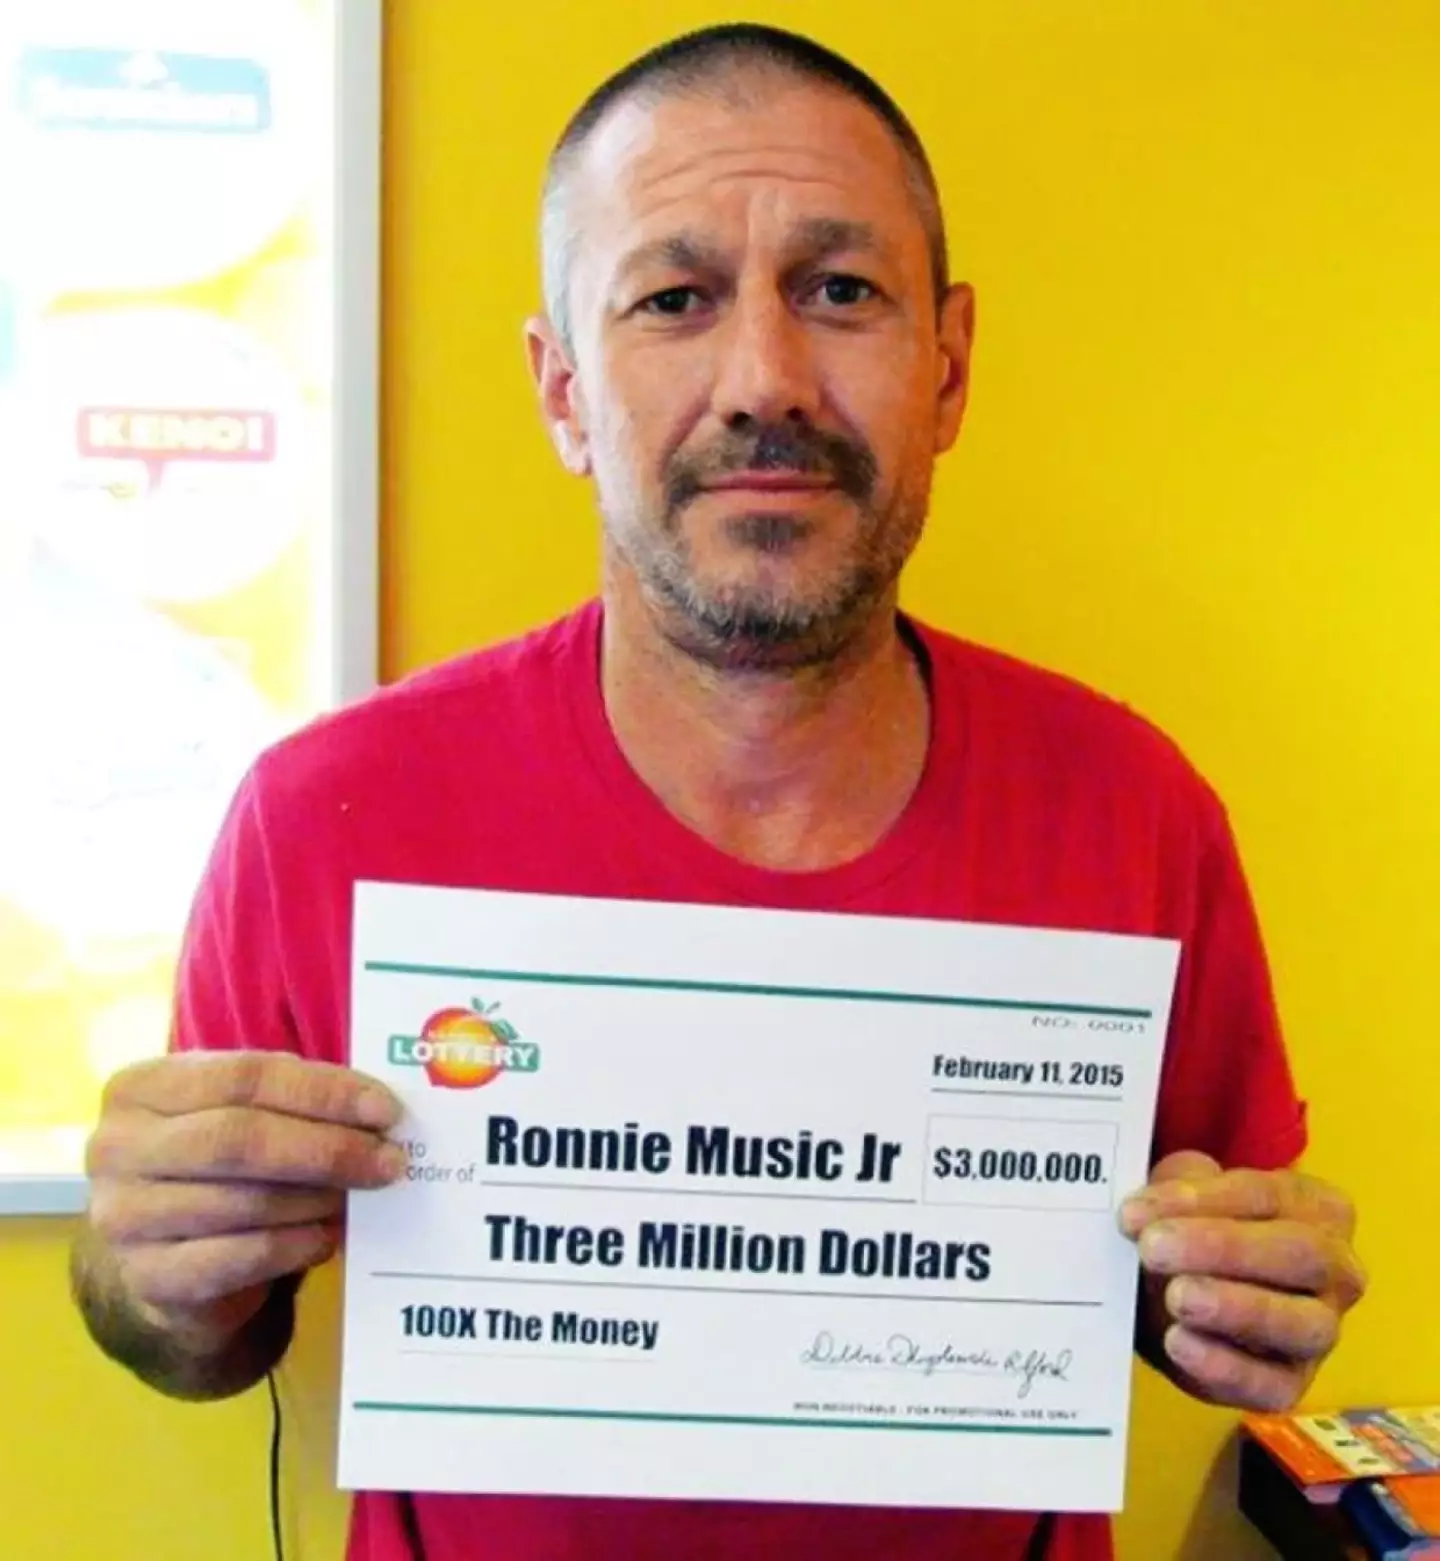 Ronnie Music Jr invested part of his lottery winnings in a drug trafficking ring.